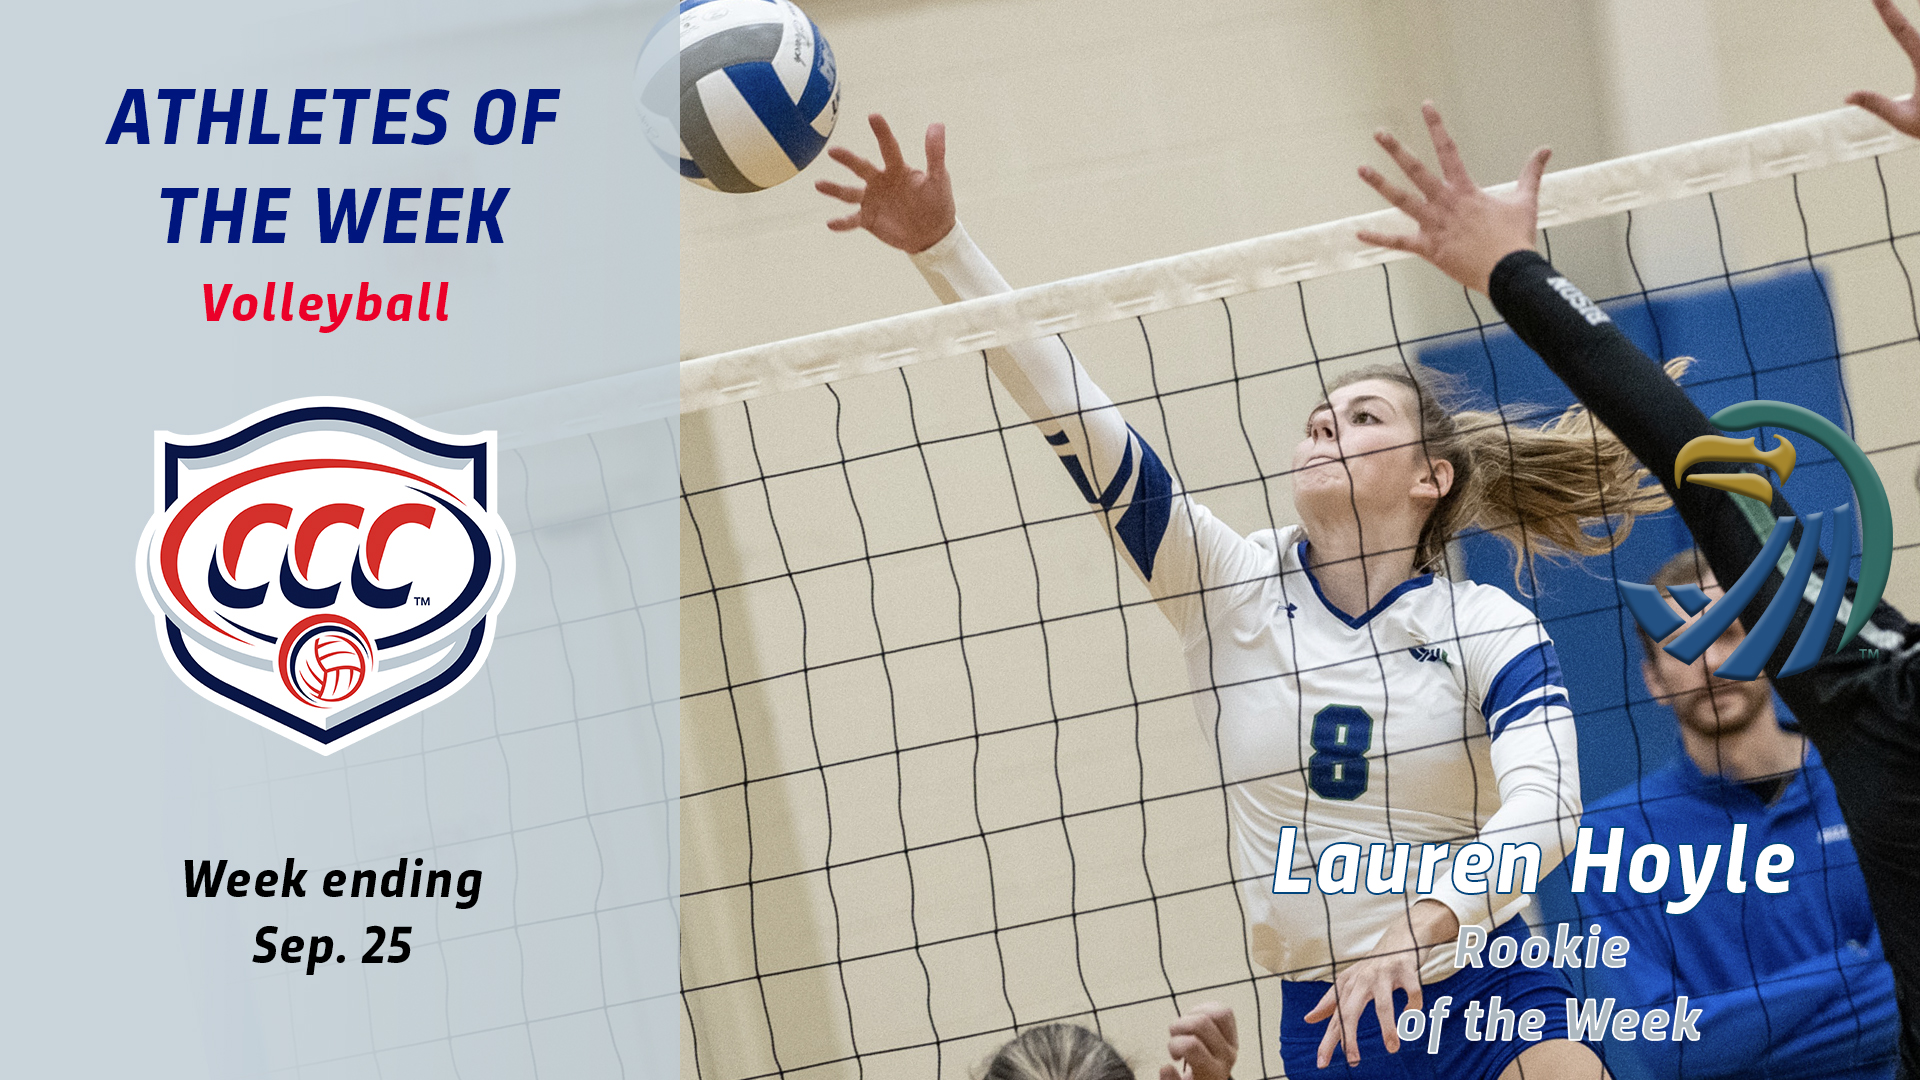 Lauren Hoyle was named CCC Rookie of the Week.